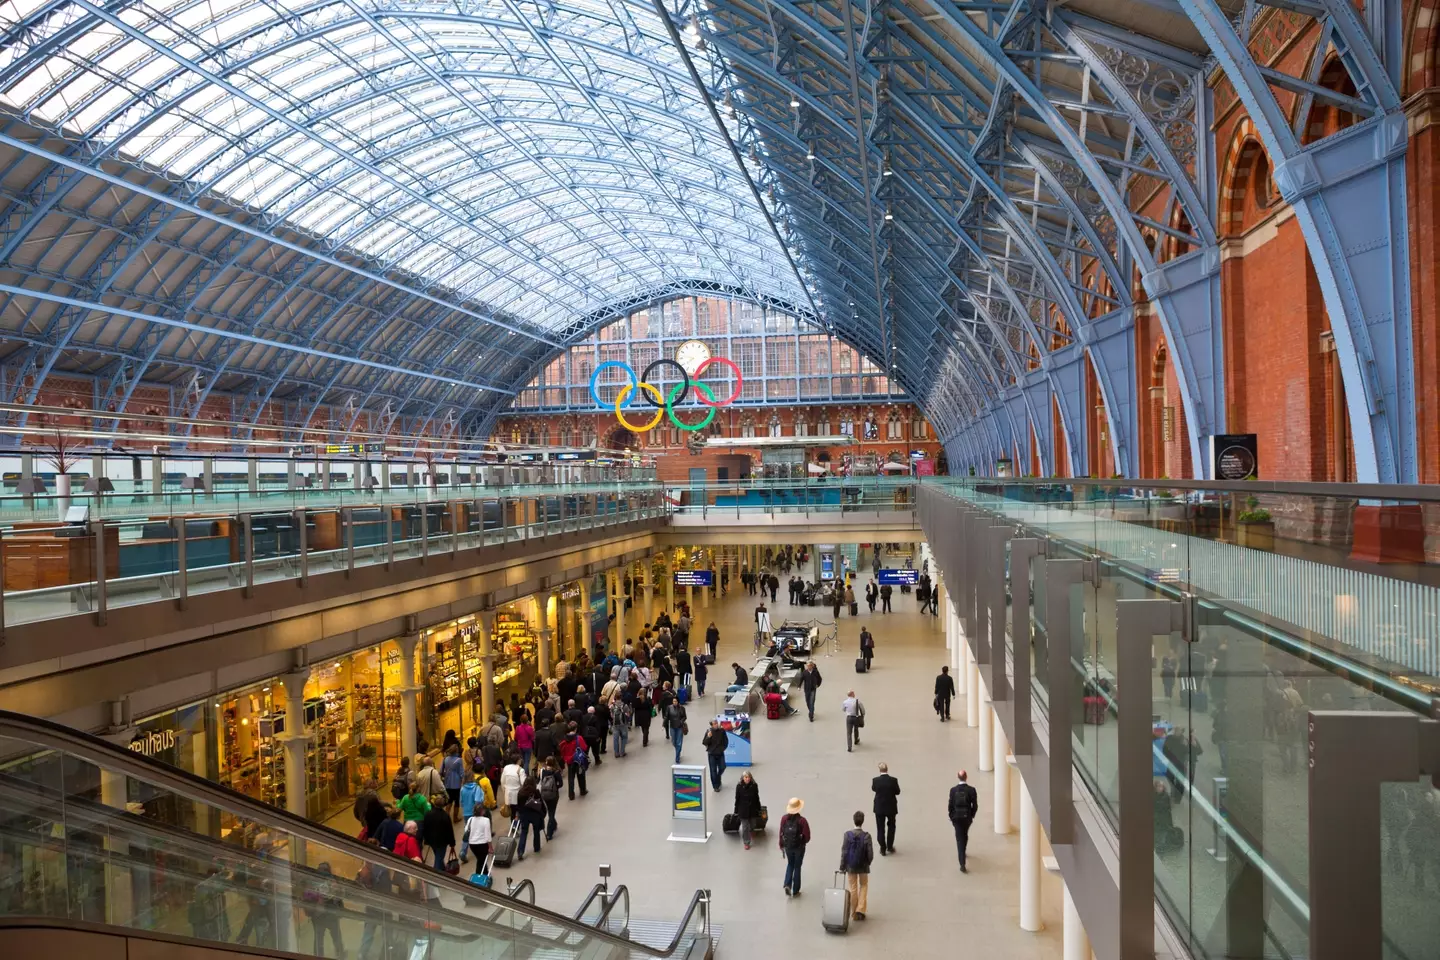 Eurostar will increase services to popular destinations like Amsterdam.